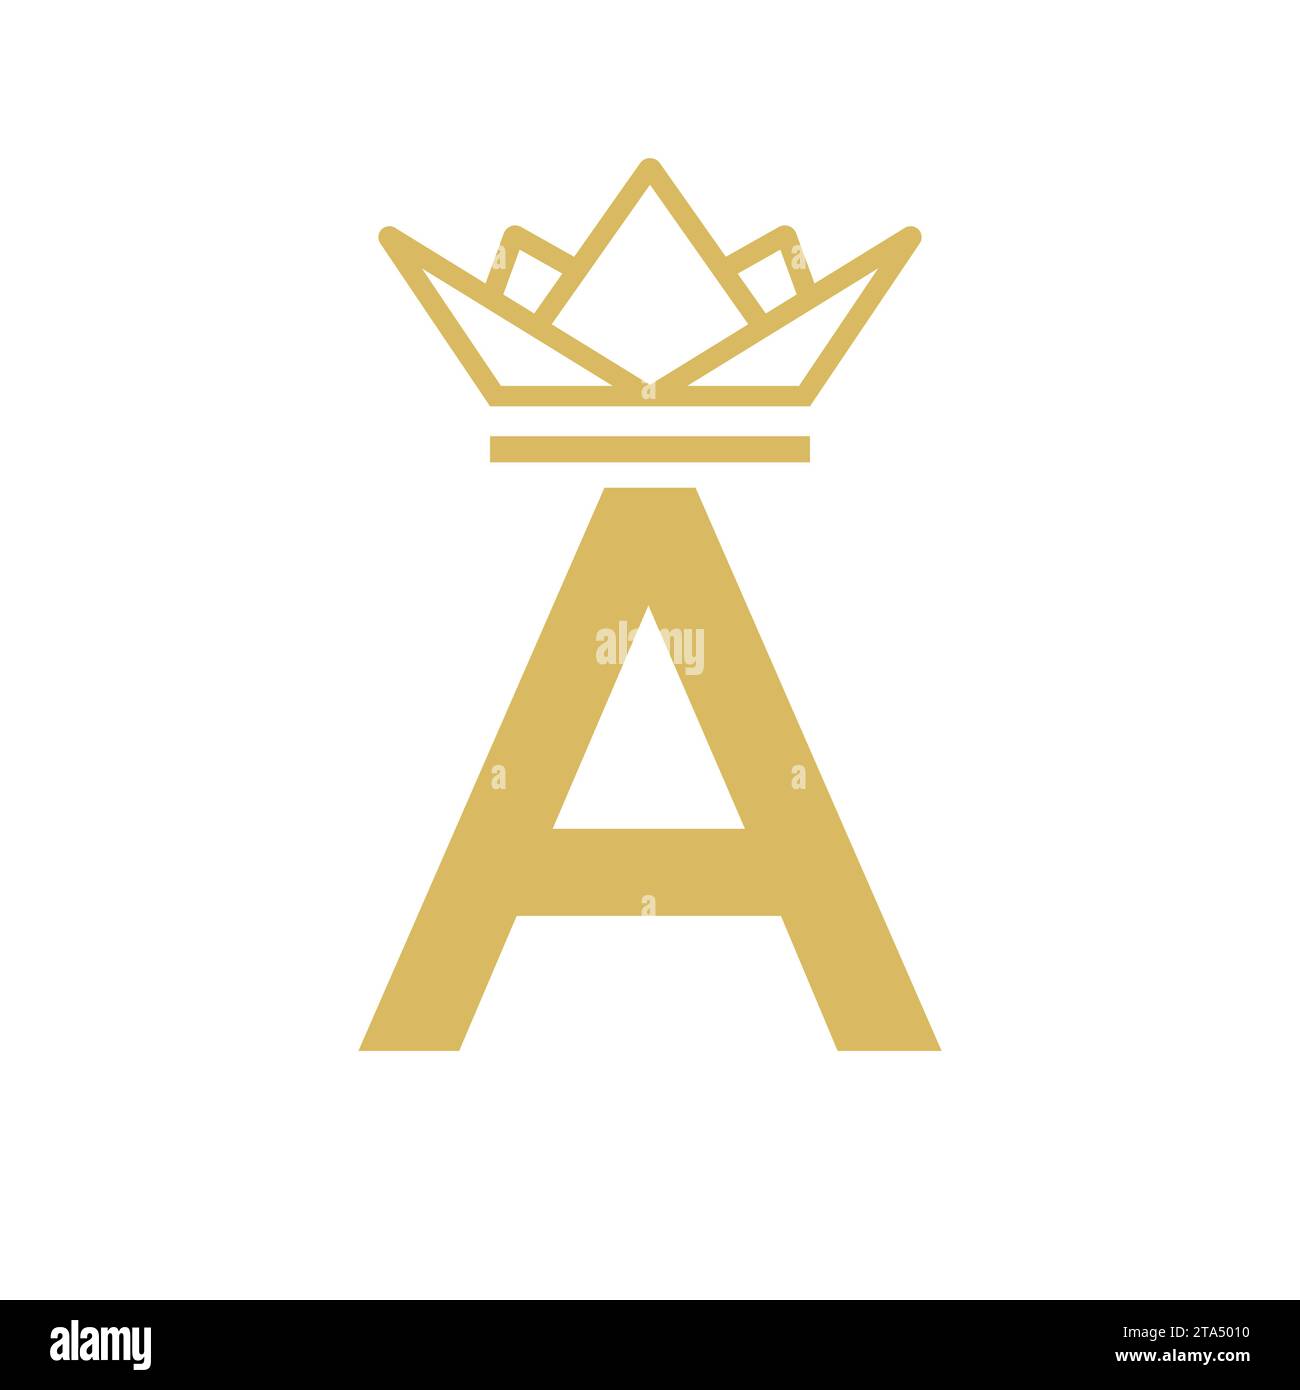 Initial Letter A Crown Logo. Crown Logo for Beauty, Fashion, Star, Elegant, Luxury Sign Stock Vector